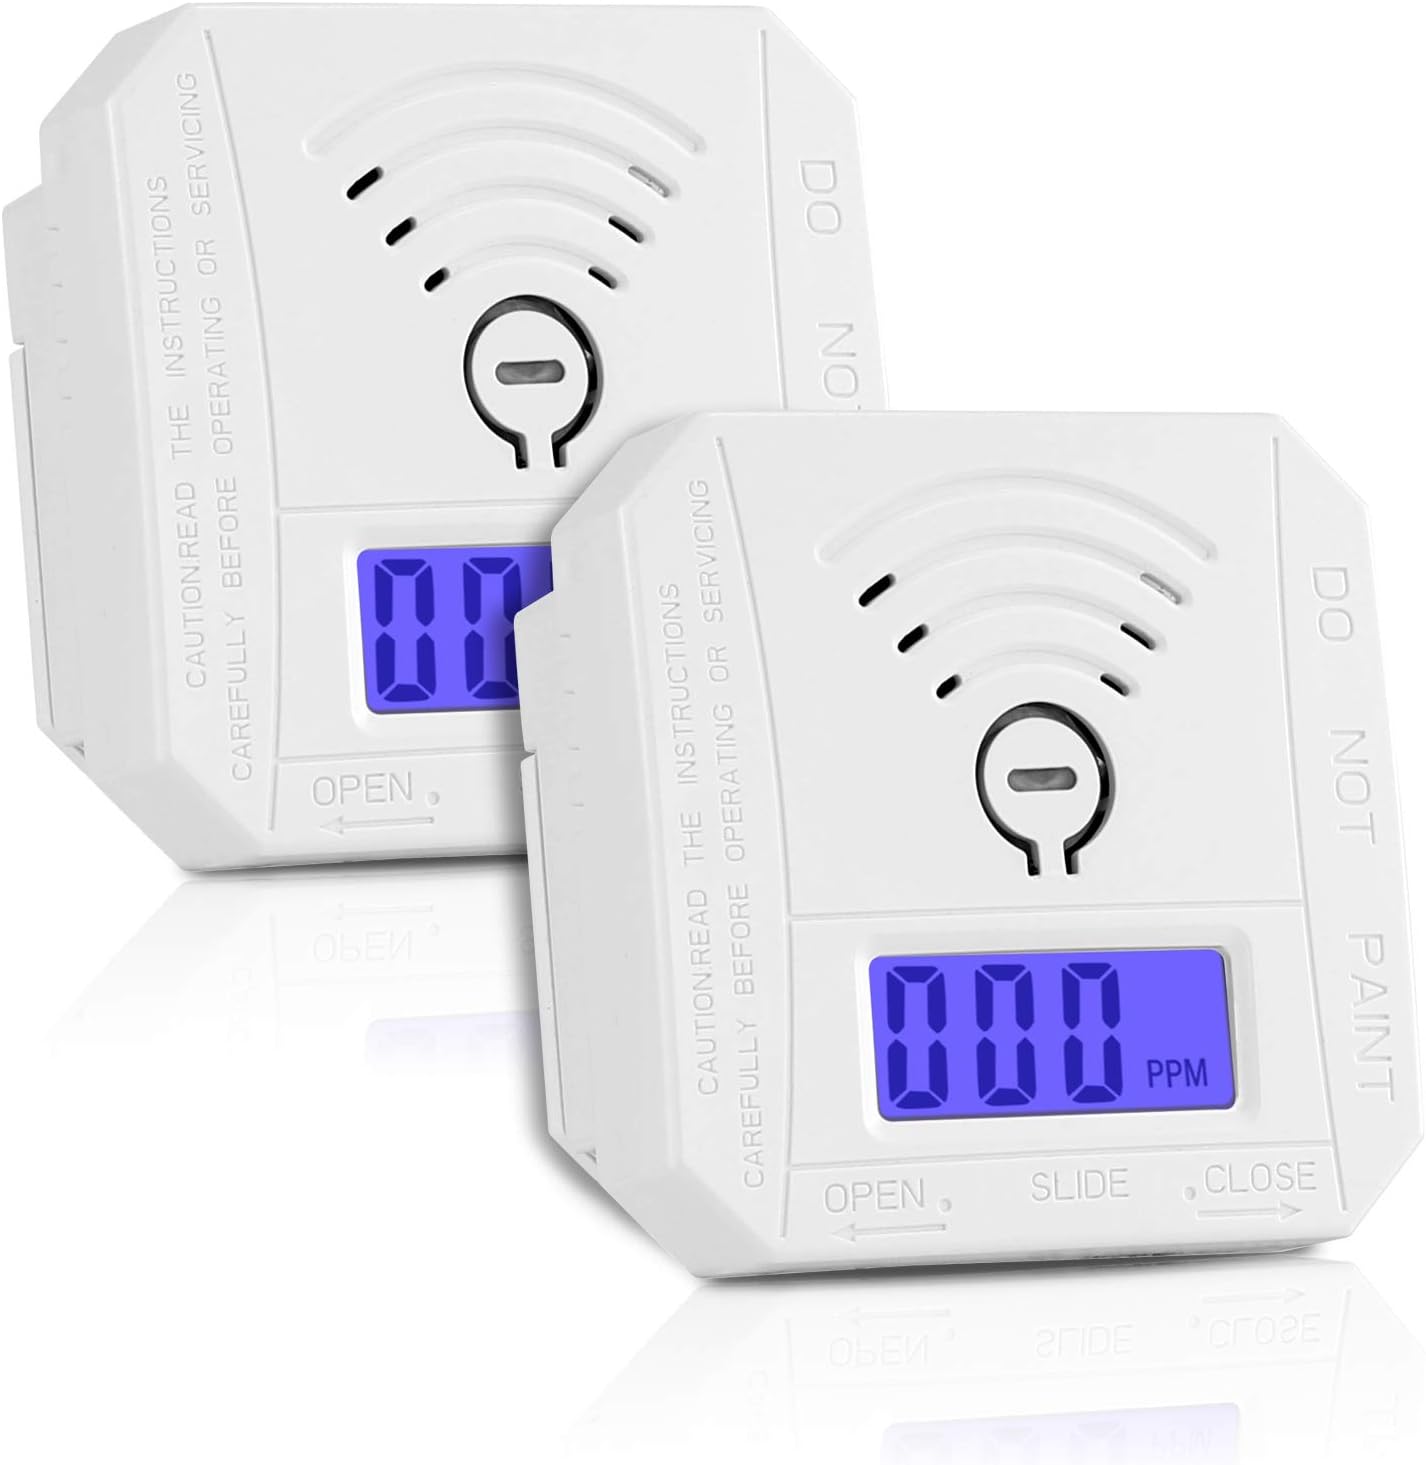 FDUIOSPF Carbon Monoxide Detector ,CO Gas Monitor Alarm Detector Complies with UL 2034 Standards ,CO Sensor with LED Digital Display for